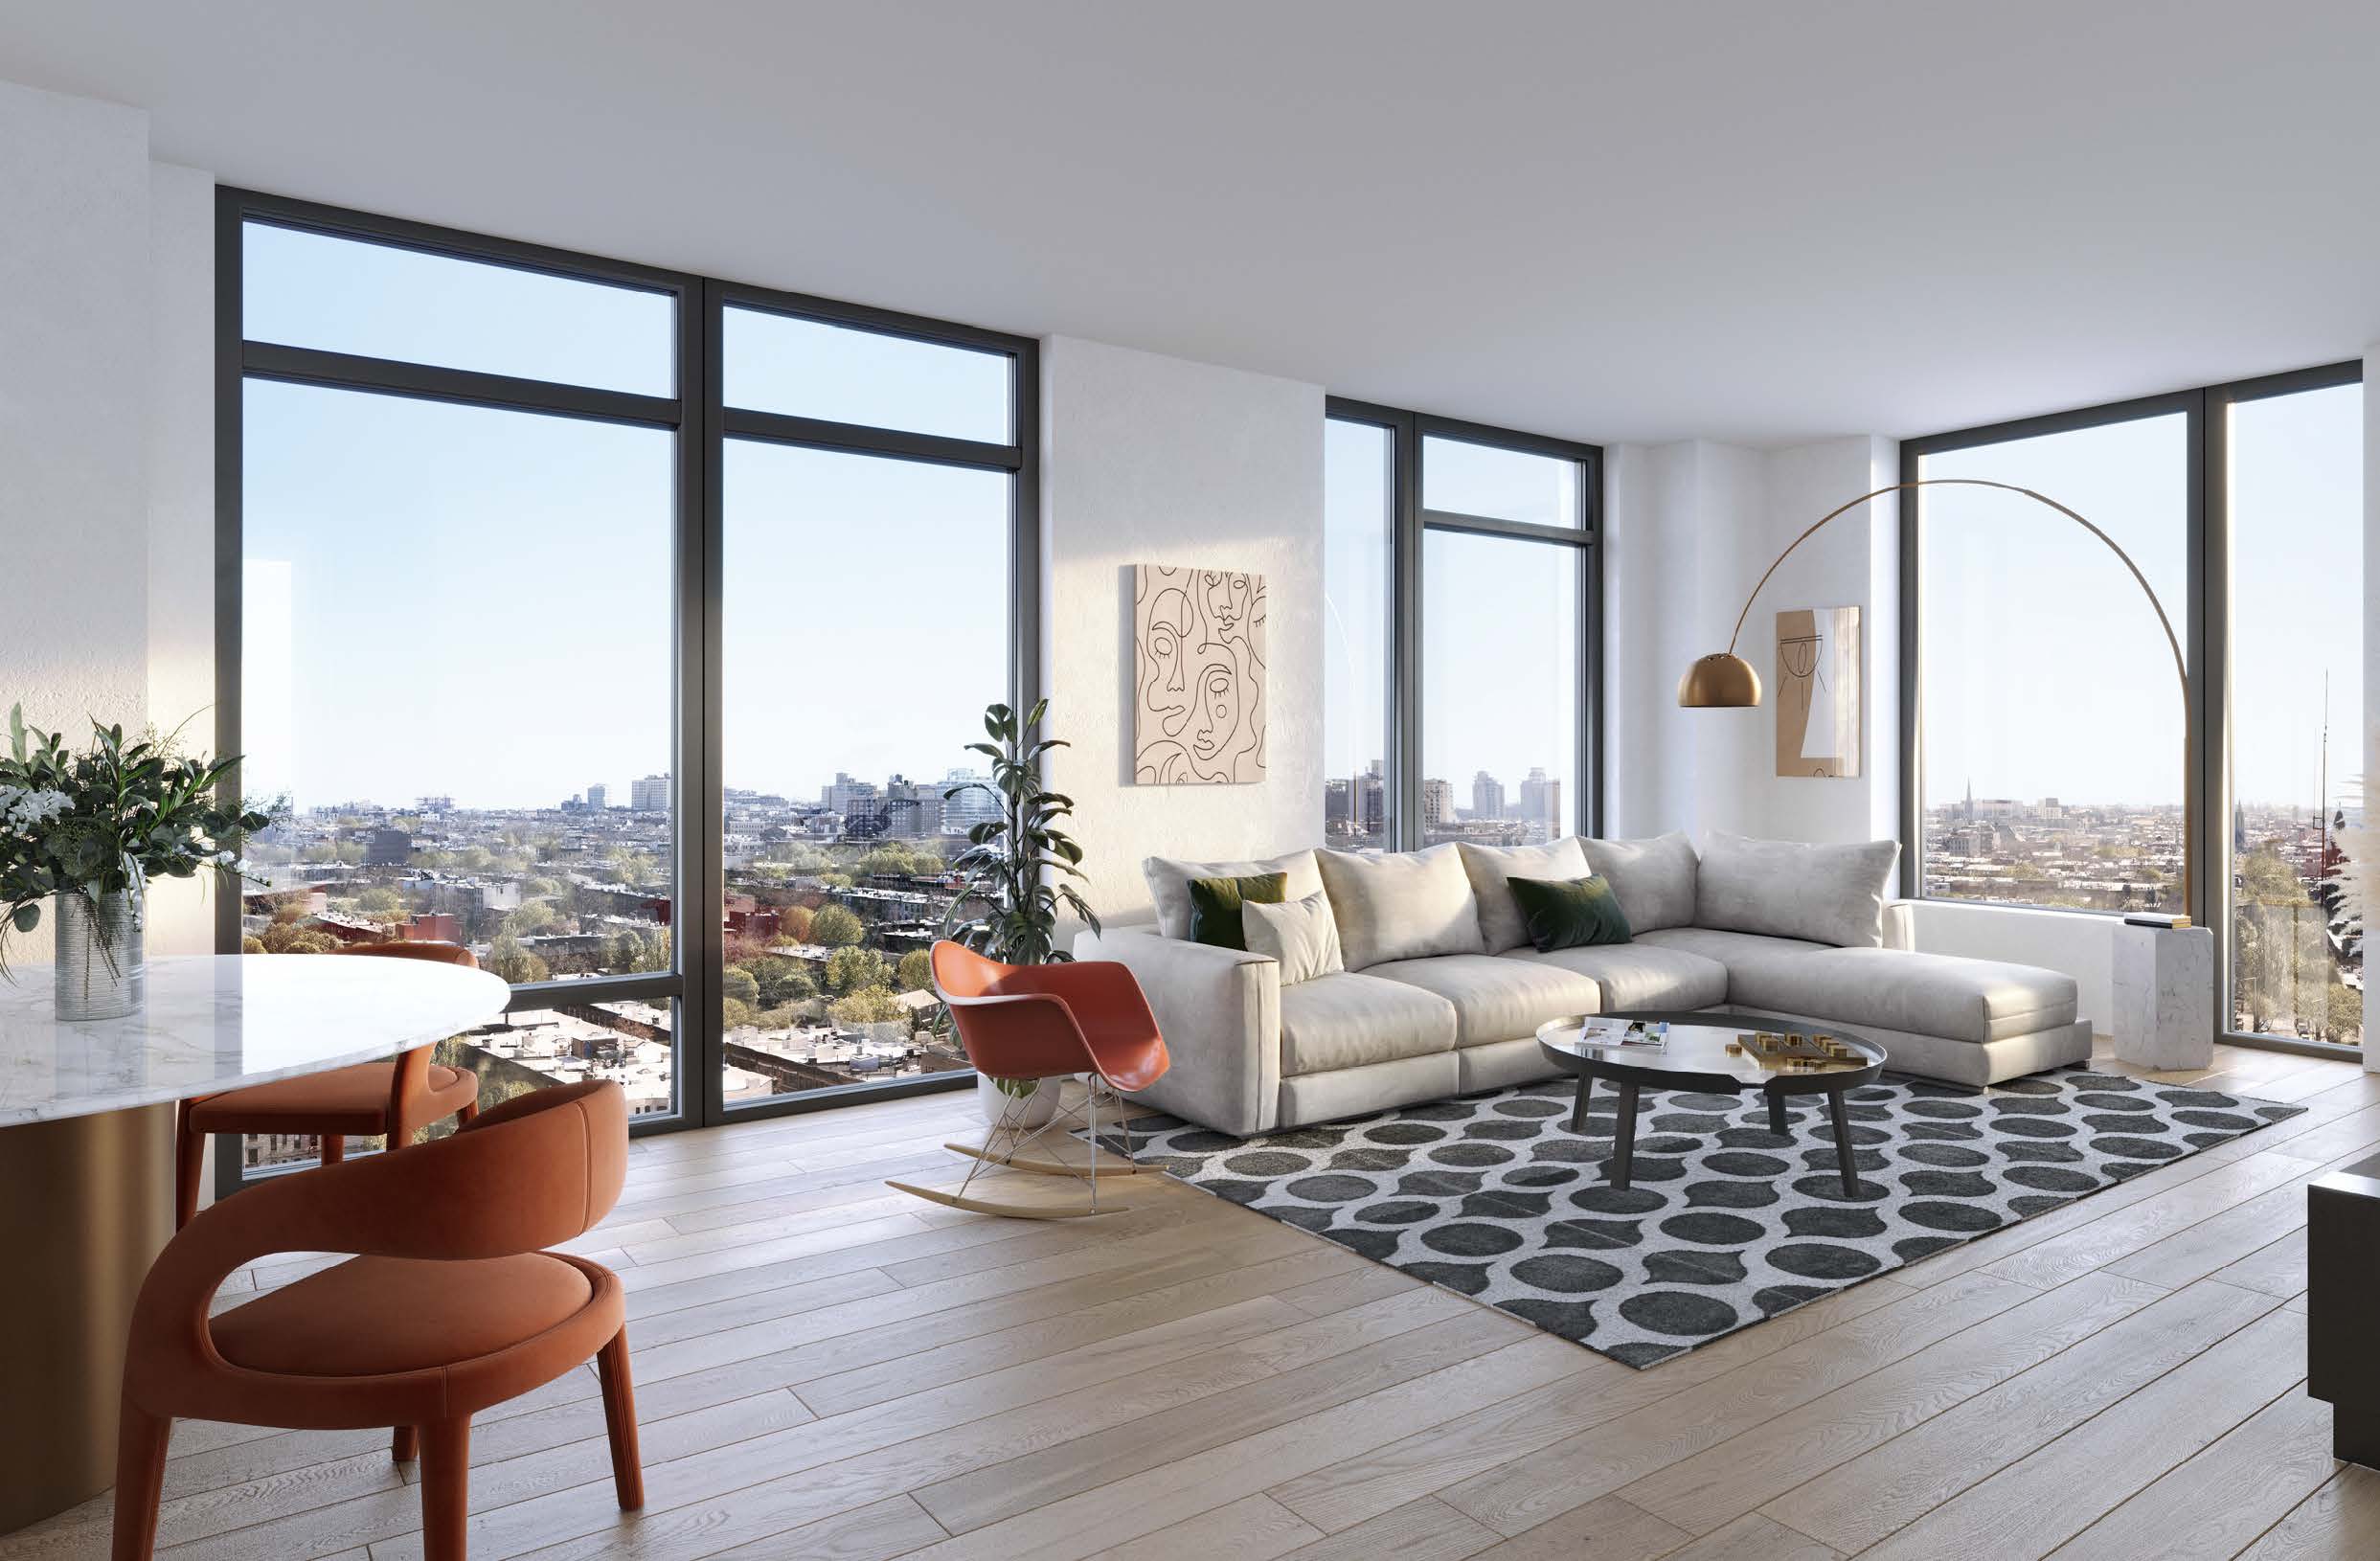 Large living room with floor to ceiling windows and luxury furnishings at Plank Road. Rental apartments in Prospect Heights.